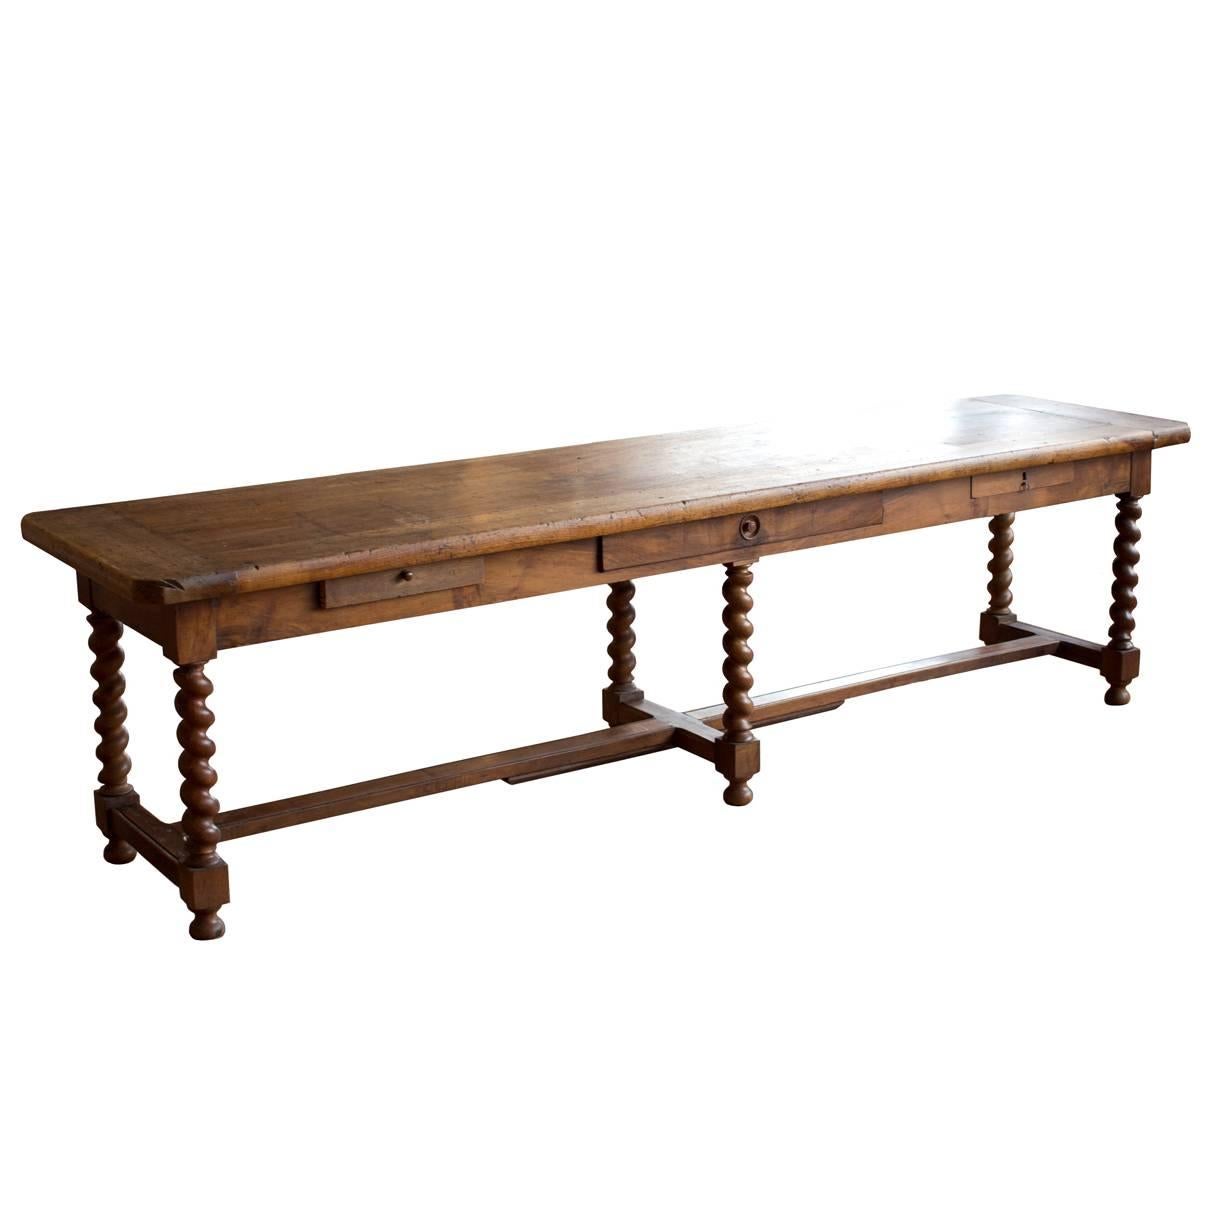 Substantial 19th Century French Walnut Draper's Table